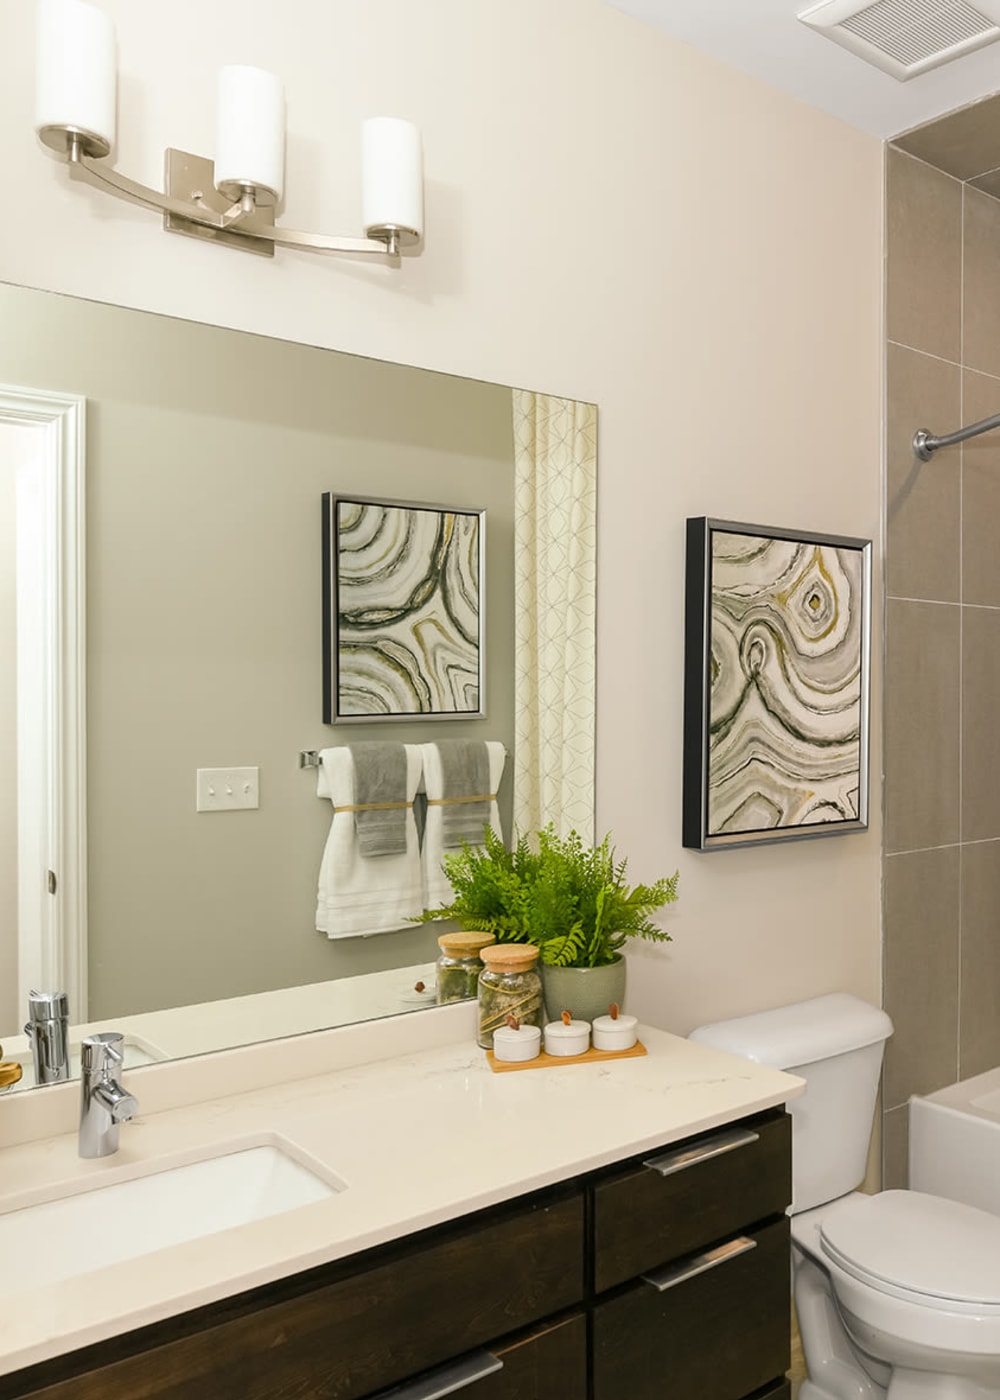 Bathroom with luxury details at Encore at Manchester in Novi, Michigan